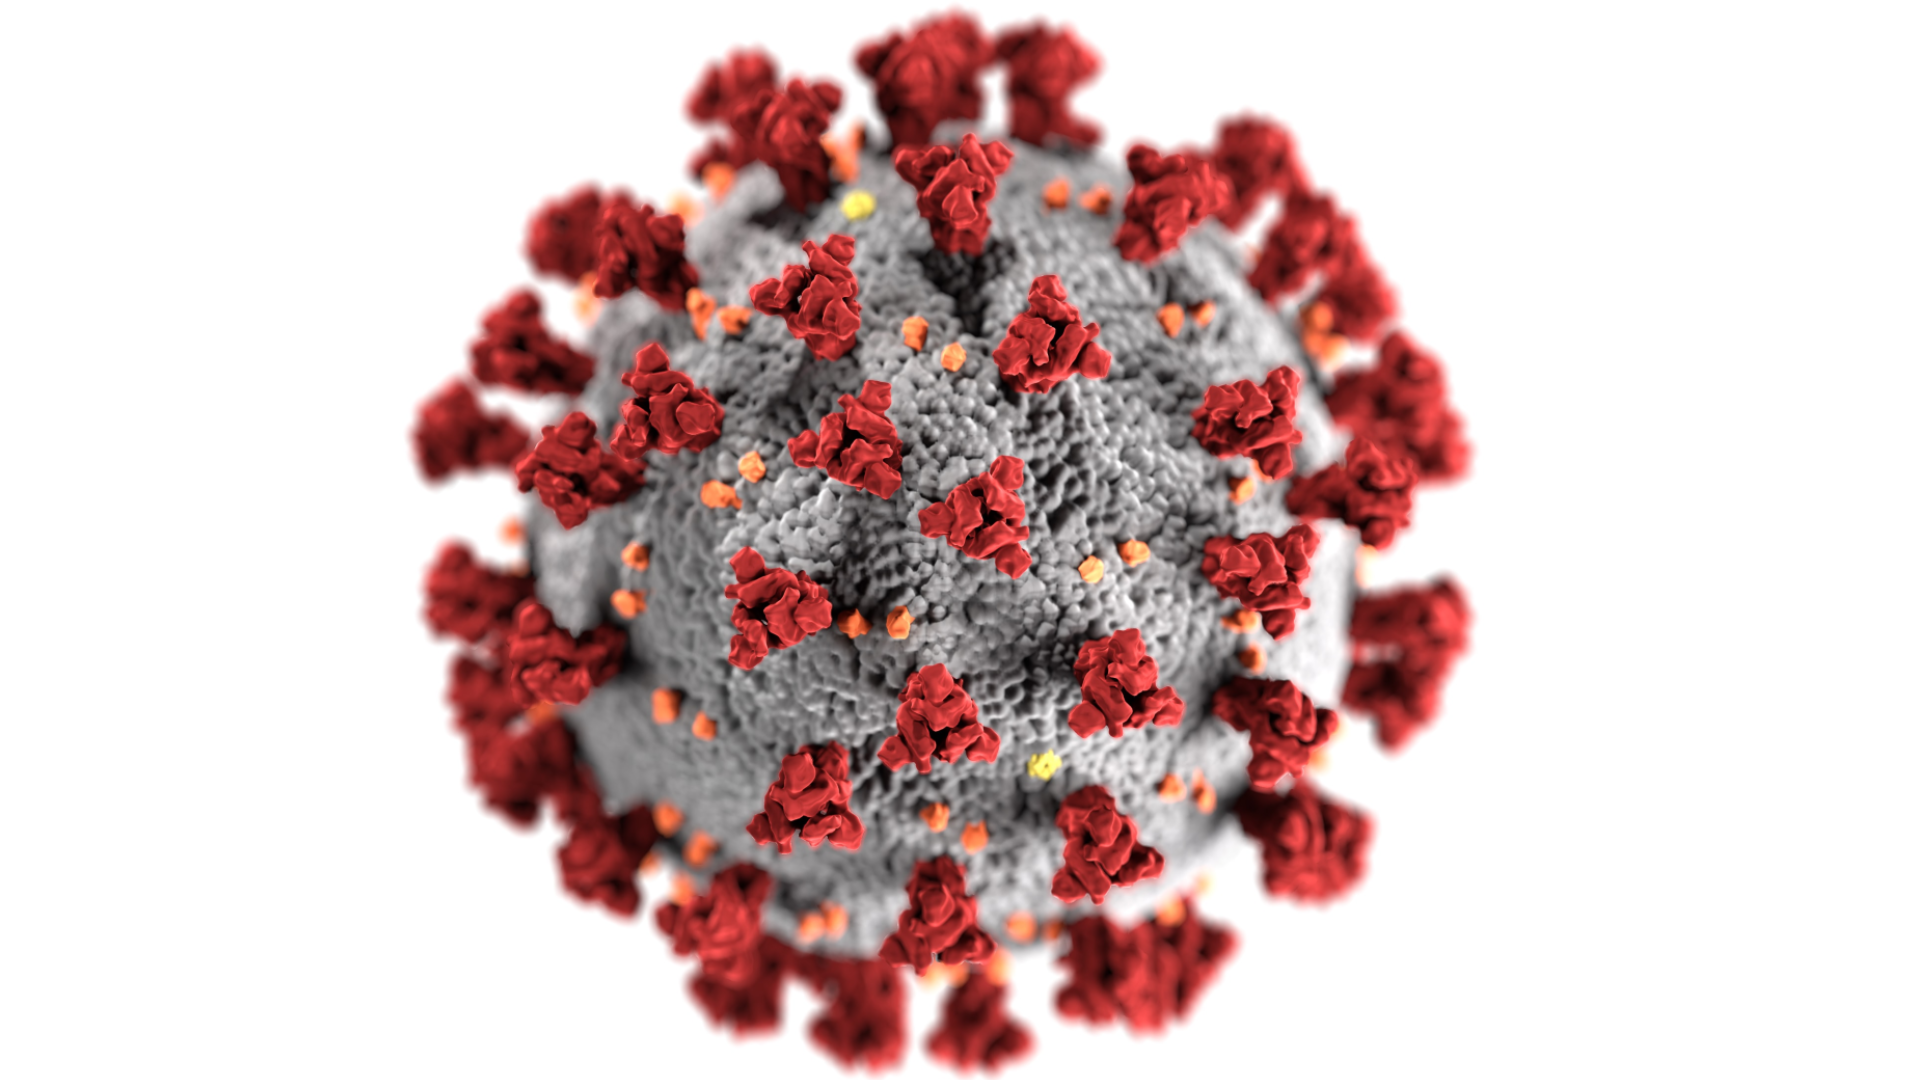 corona virus virion, with red spikes on the outer surface